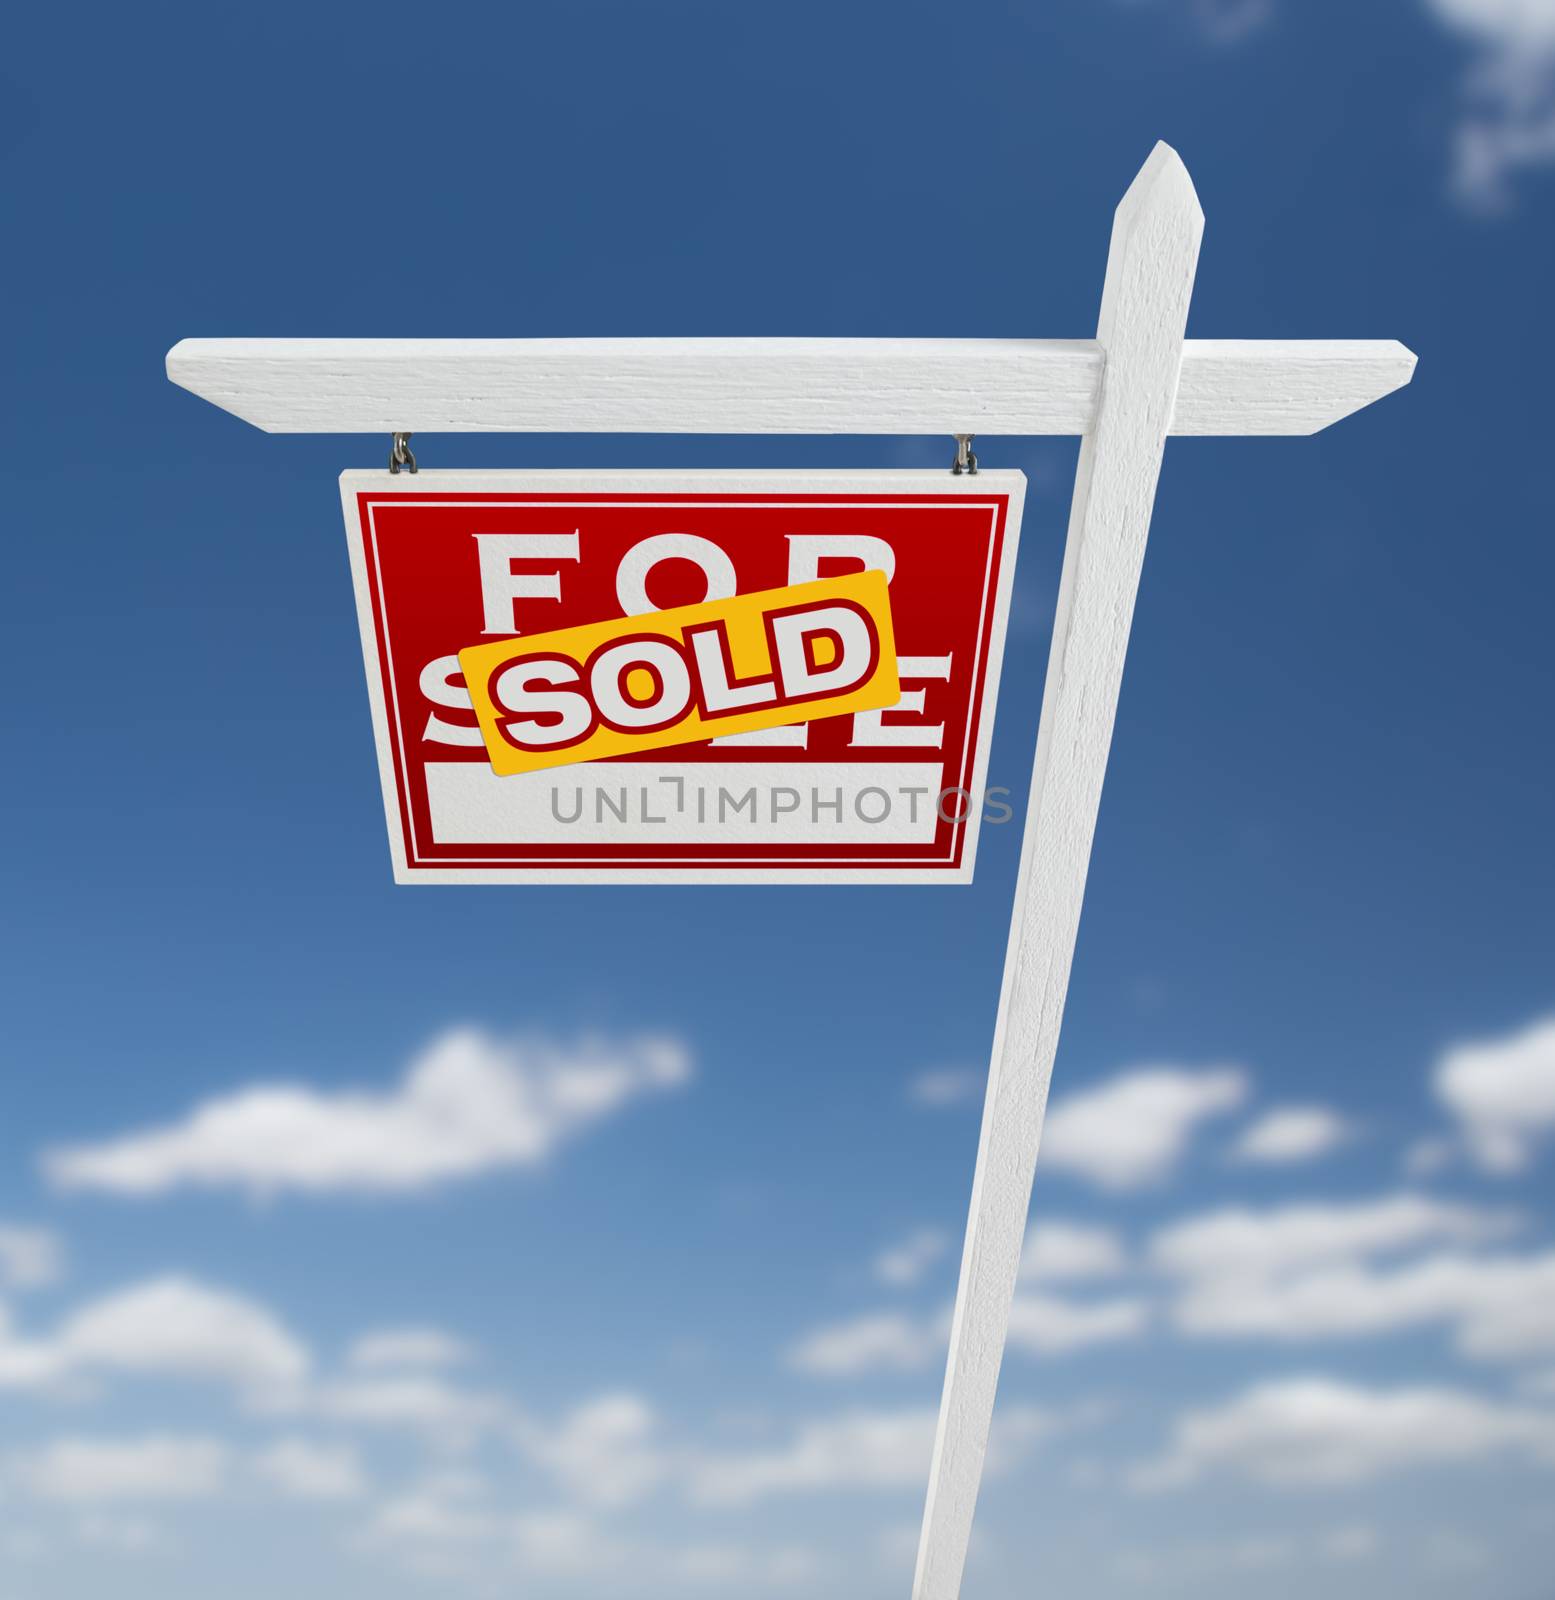 Left Facing Sold For Sale Real Estate Sign on a Blue Sky with Clouds. by Feverpitched